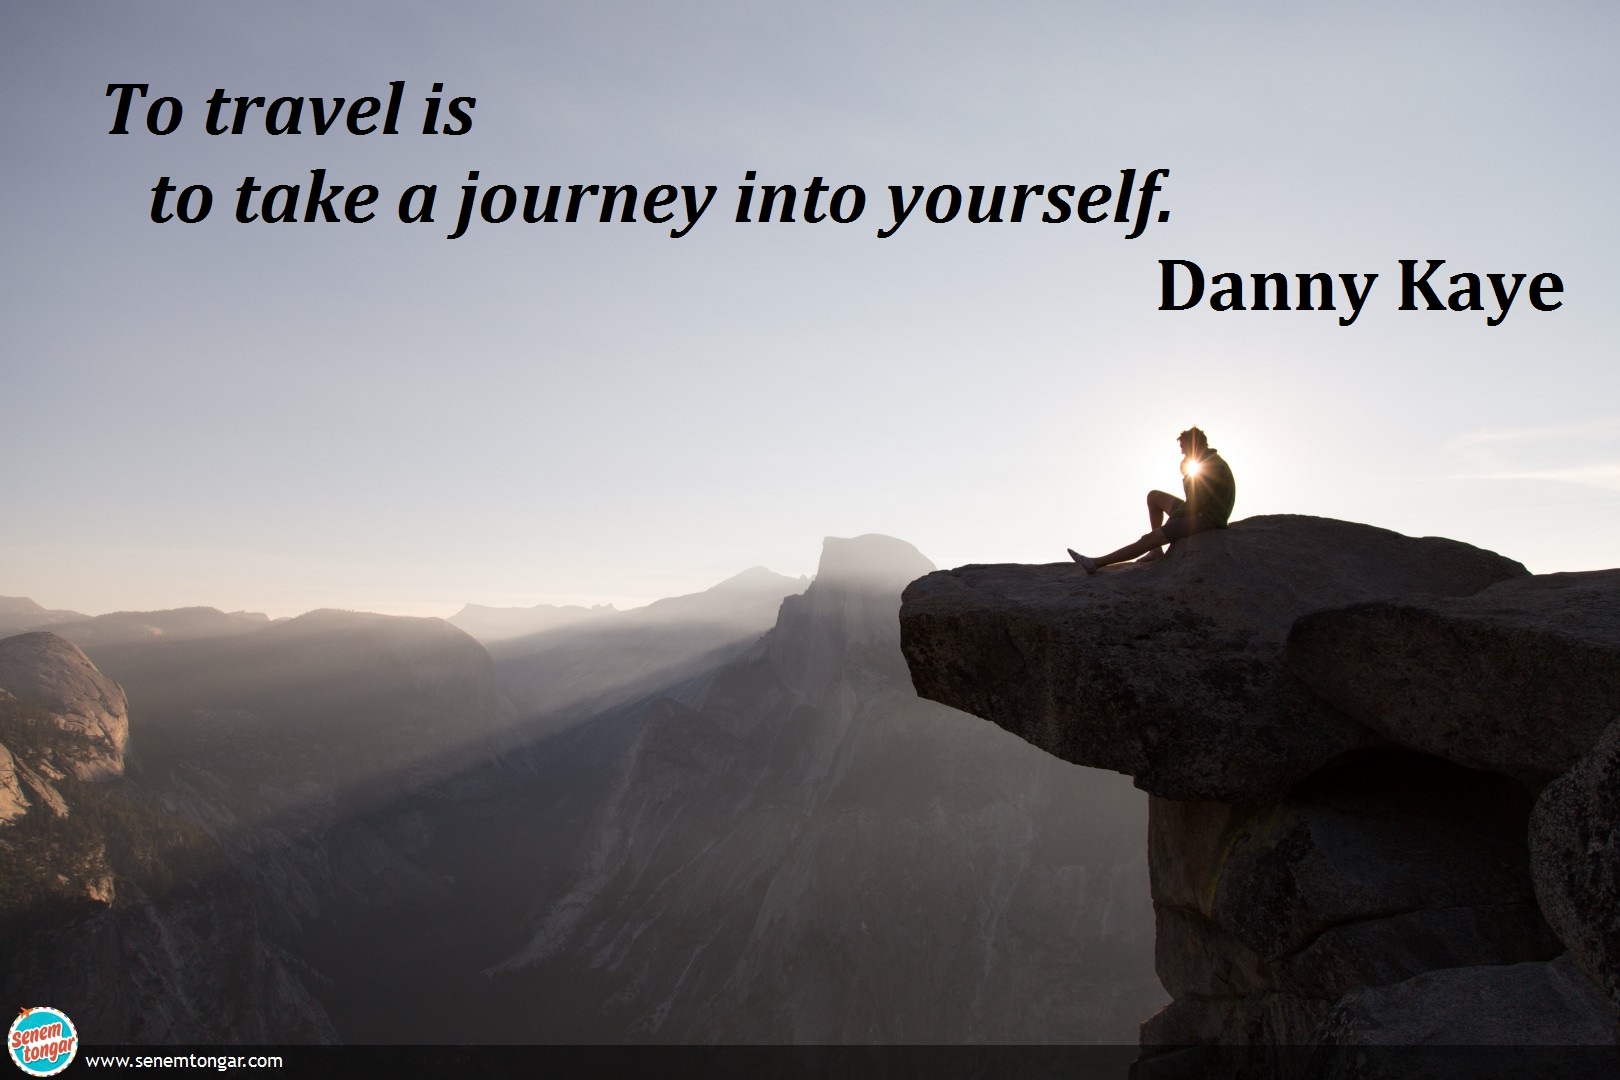 o travel is to take a journey_danny kaye